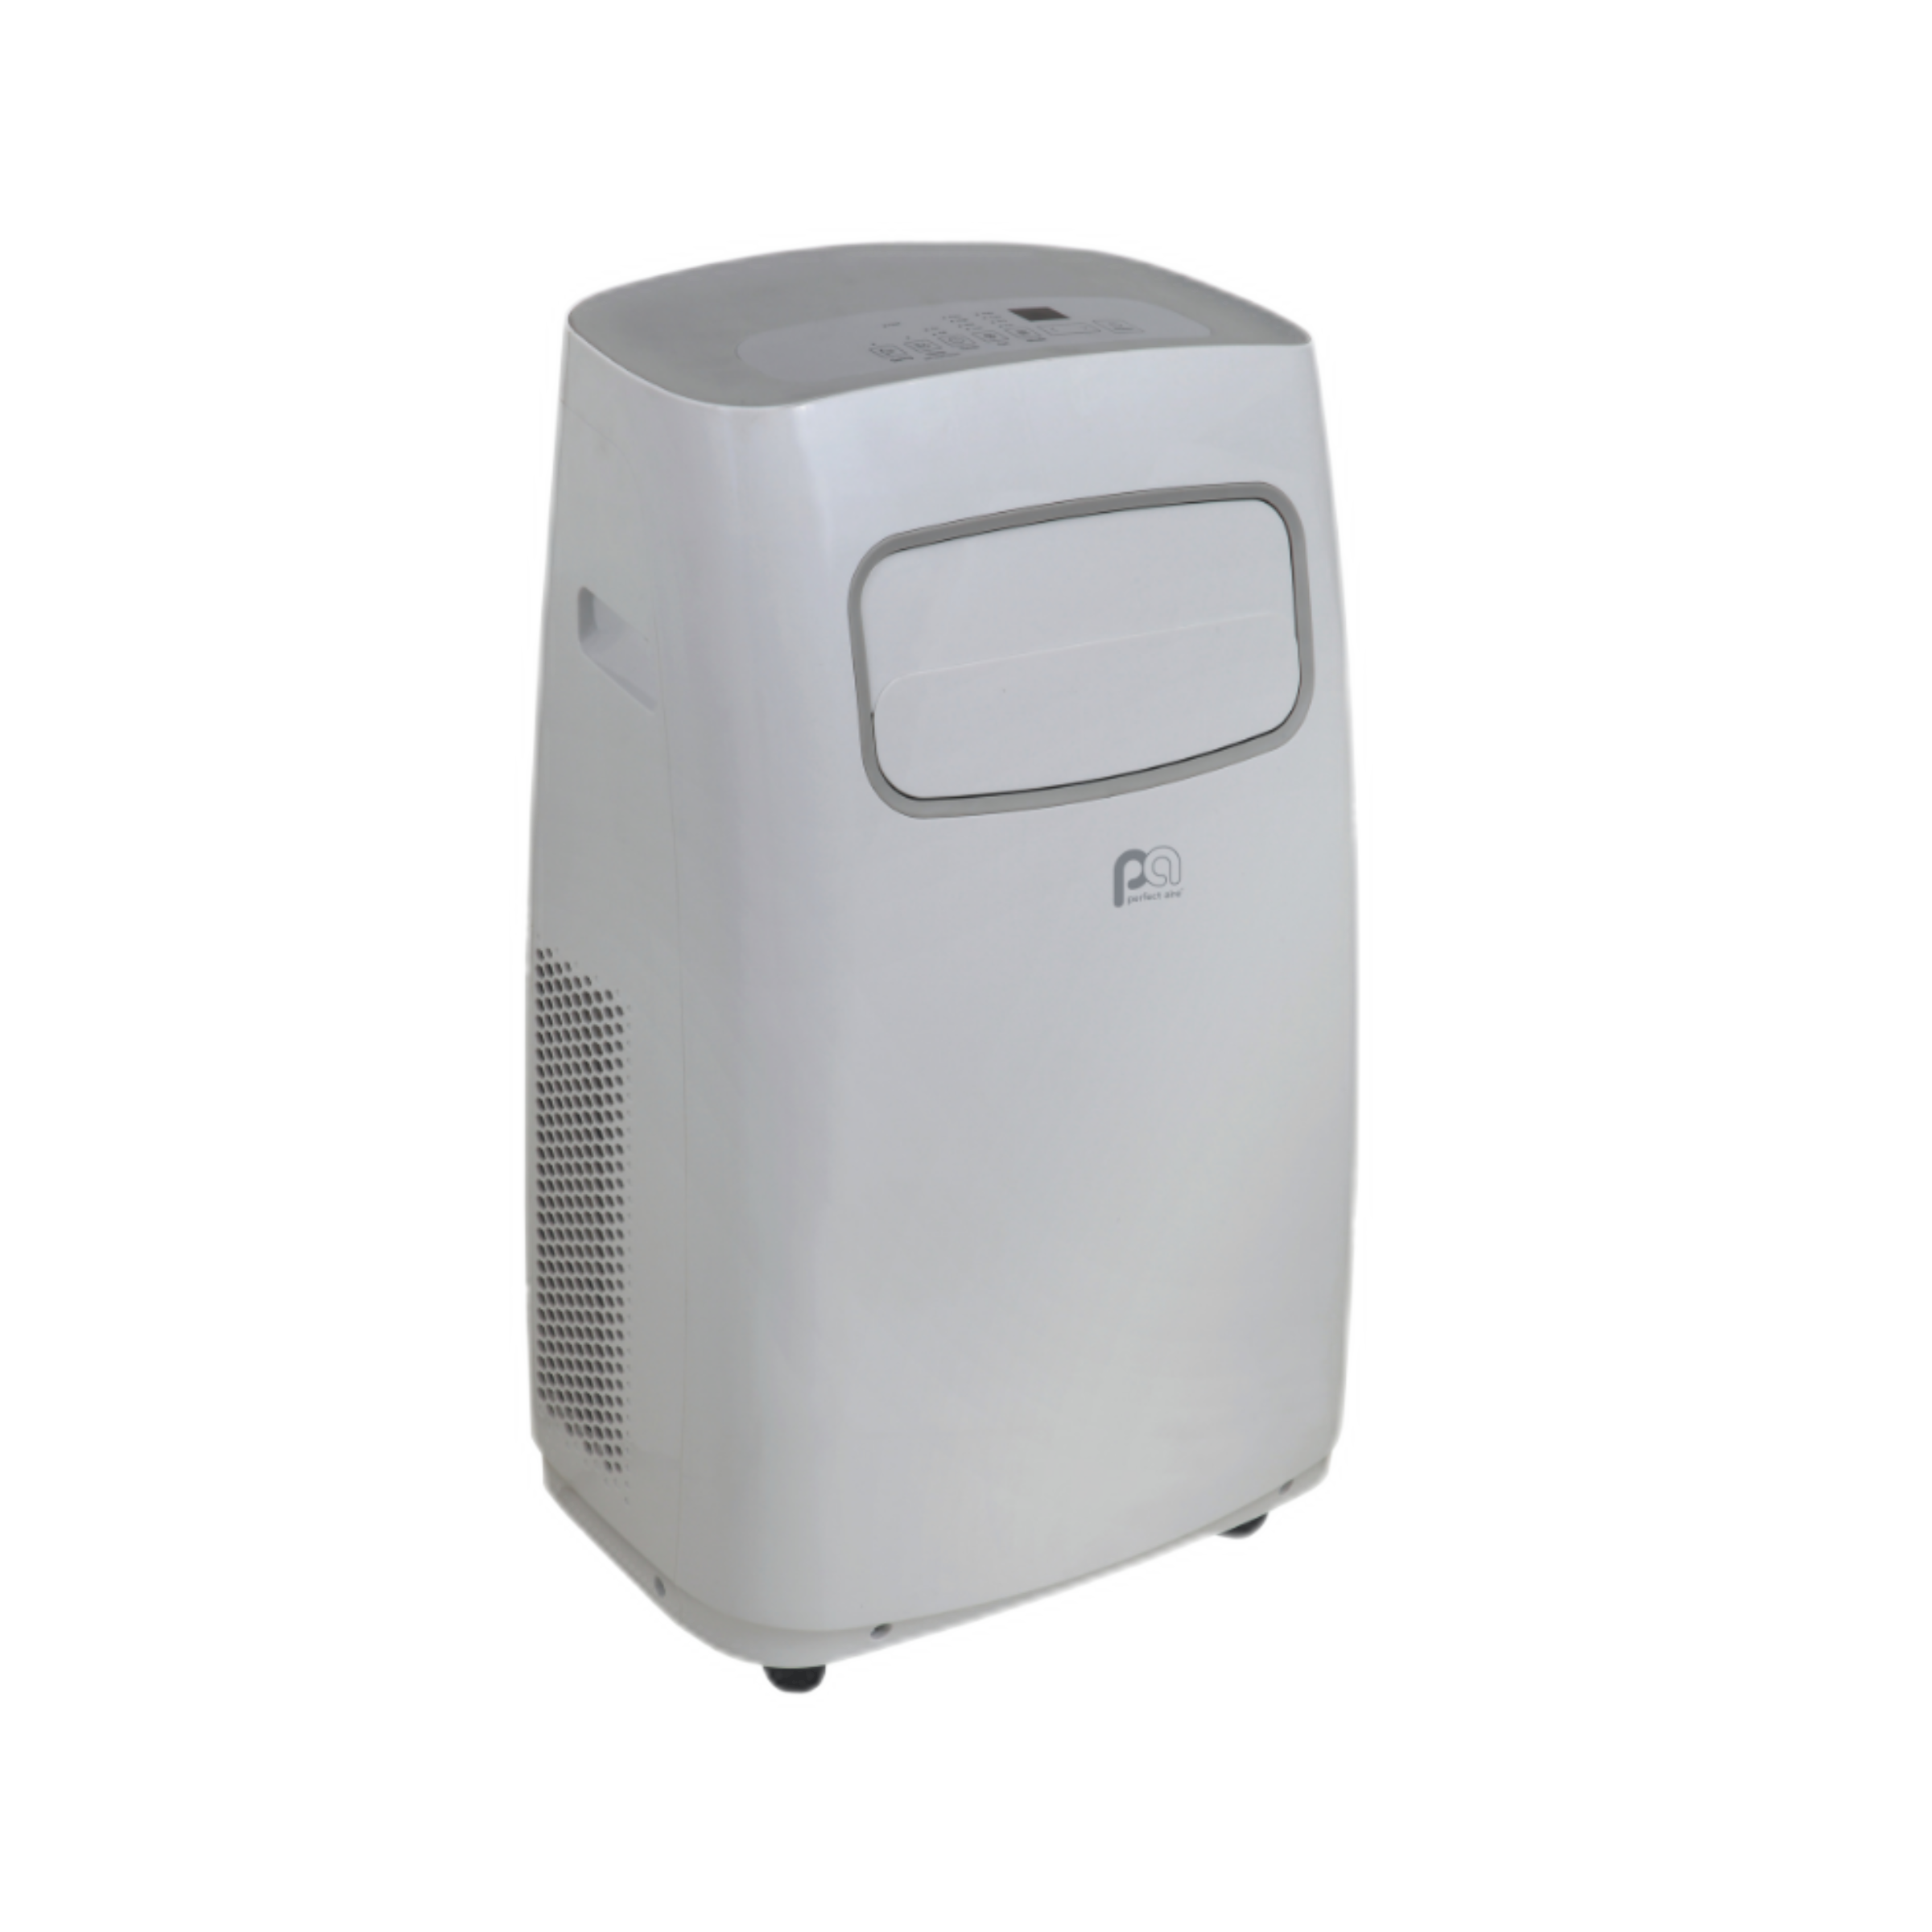 2PORT14000 Perfect Aire 14,000 BTU Compact Portable Air Conditioner - CEC, Sq. ft: 550-700 Coverage, With Remote Control, Non-Ozone Depleting R32 Refrigerant, EER = 7.3